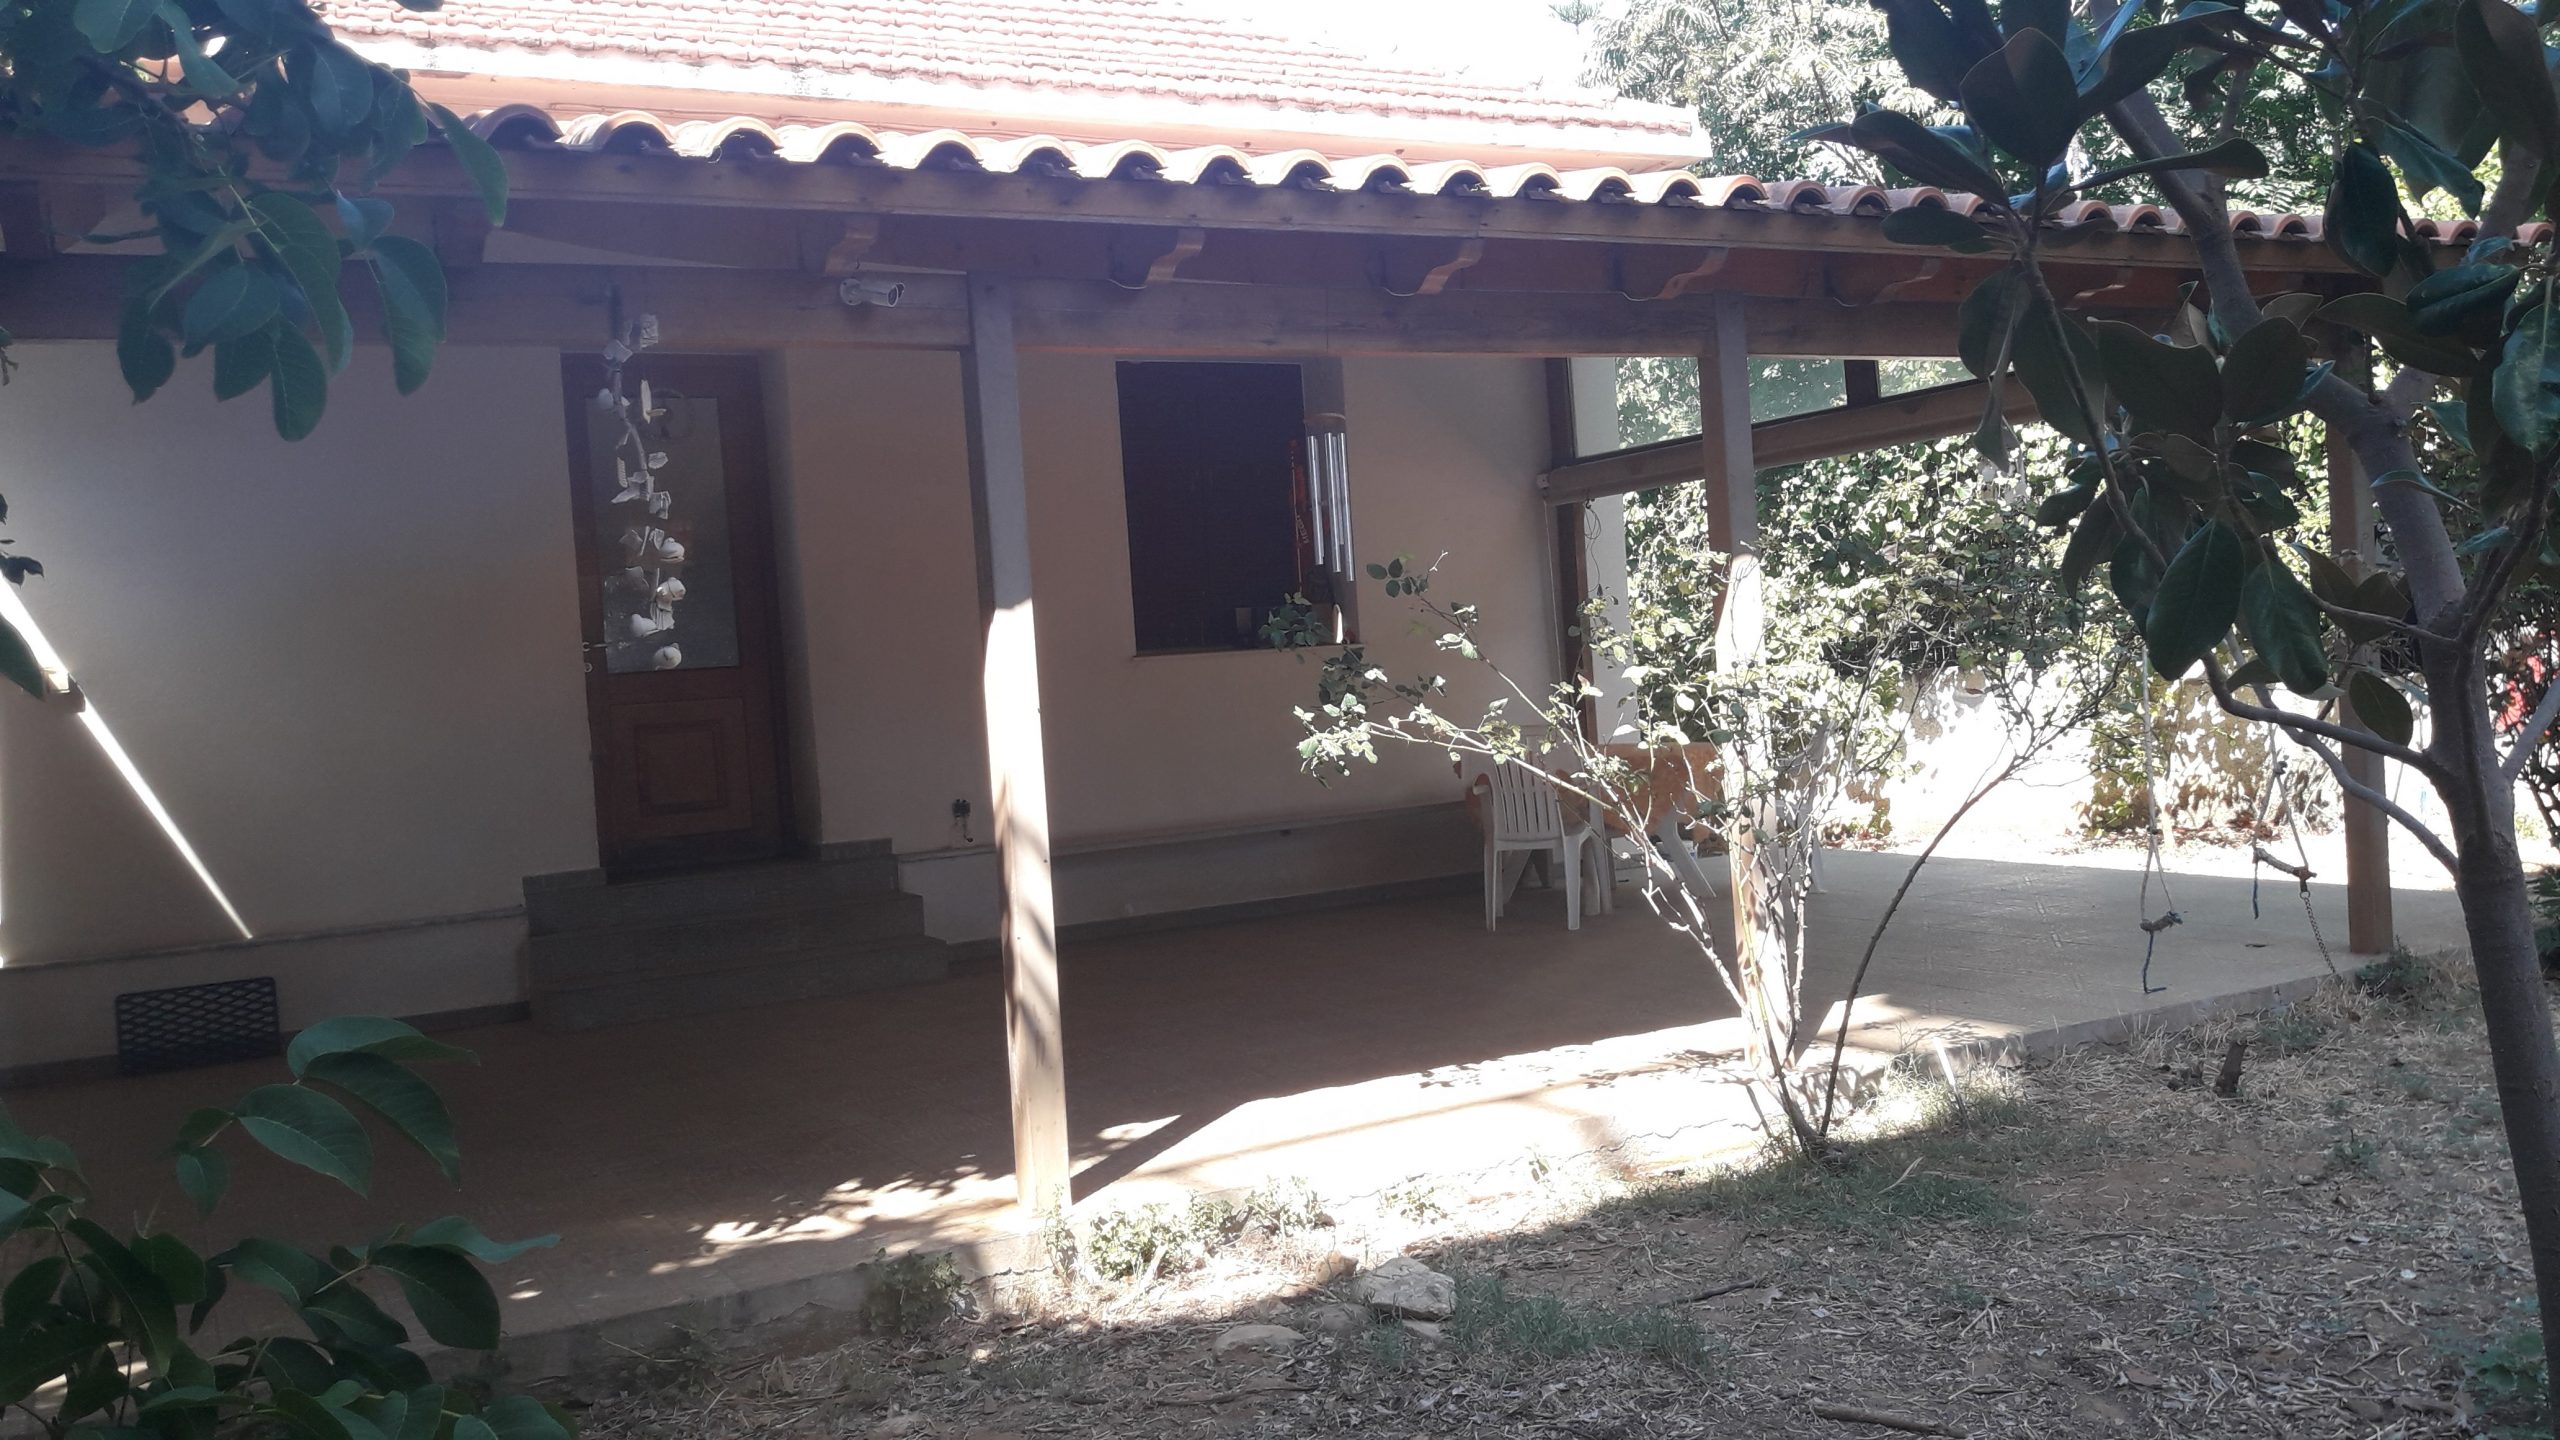 Detached house Chania – Halepa 128 sq.m. on a 643 sq.m. plot, with a building balance of 515 sq.m.